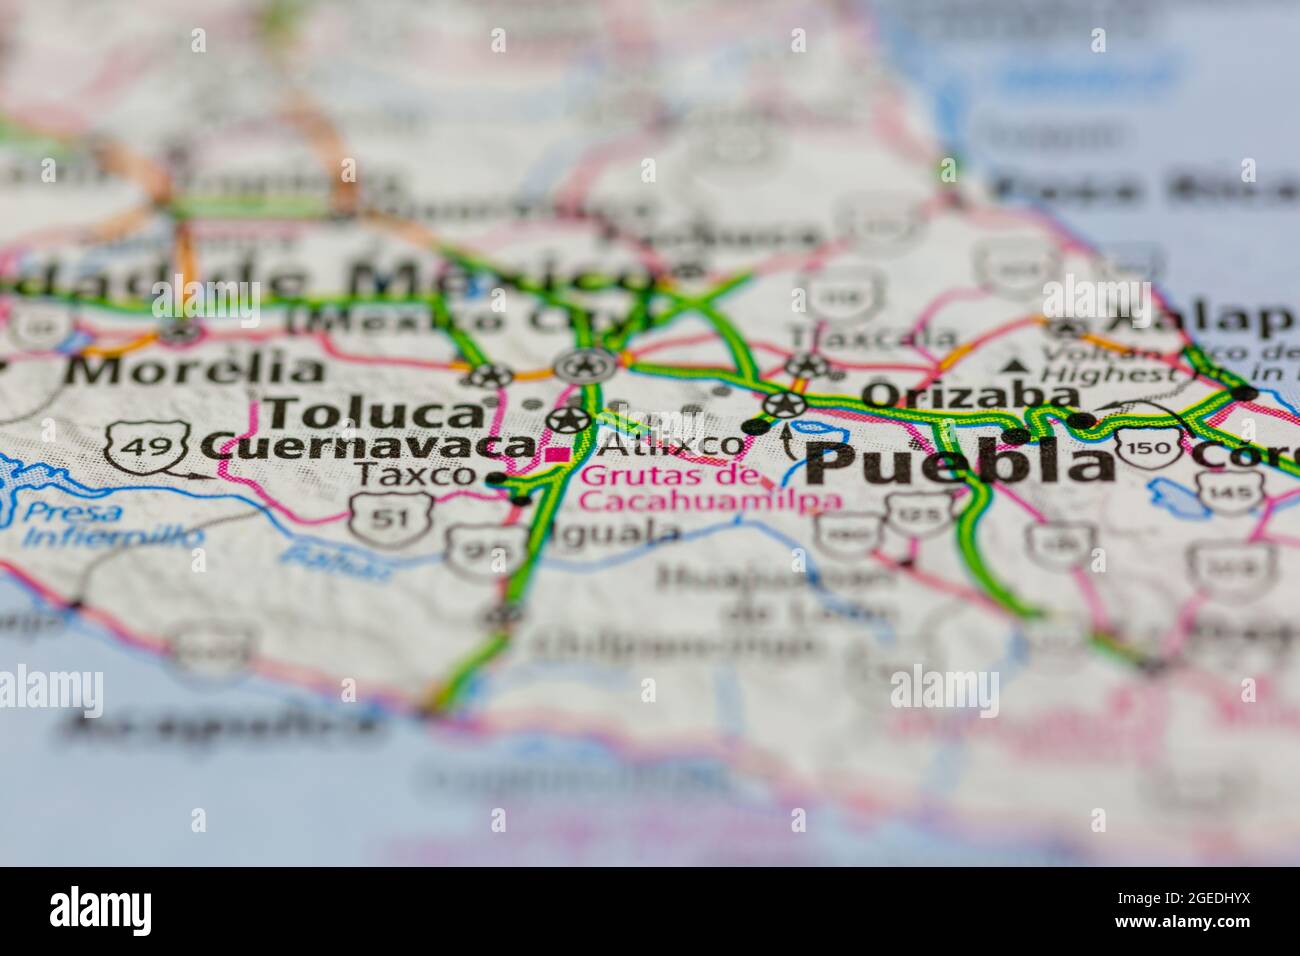 Atlixco Mexico Shown On A Road Map Or Geography Map 2GEDHYX 